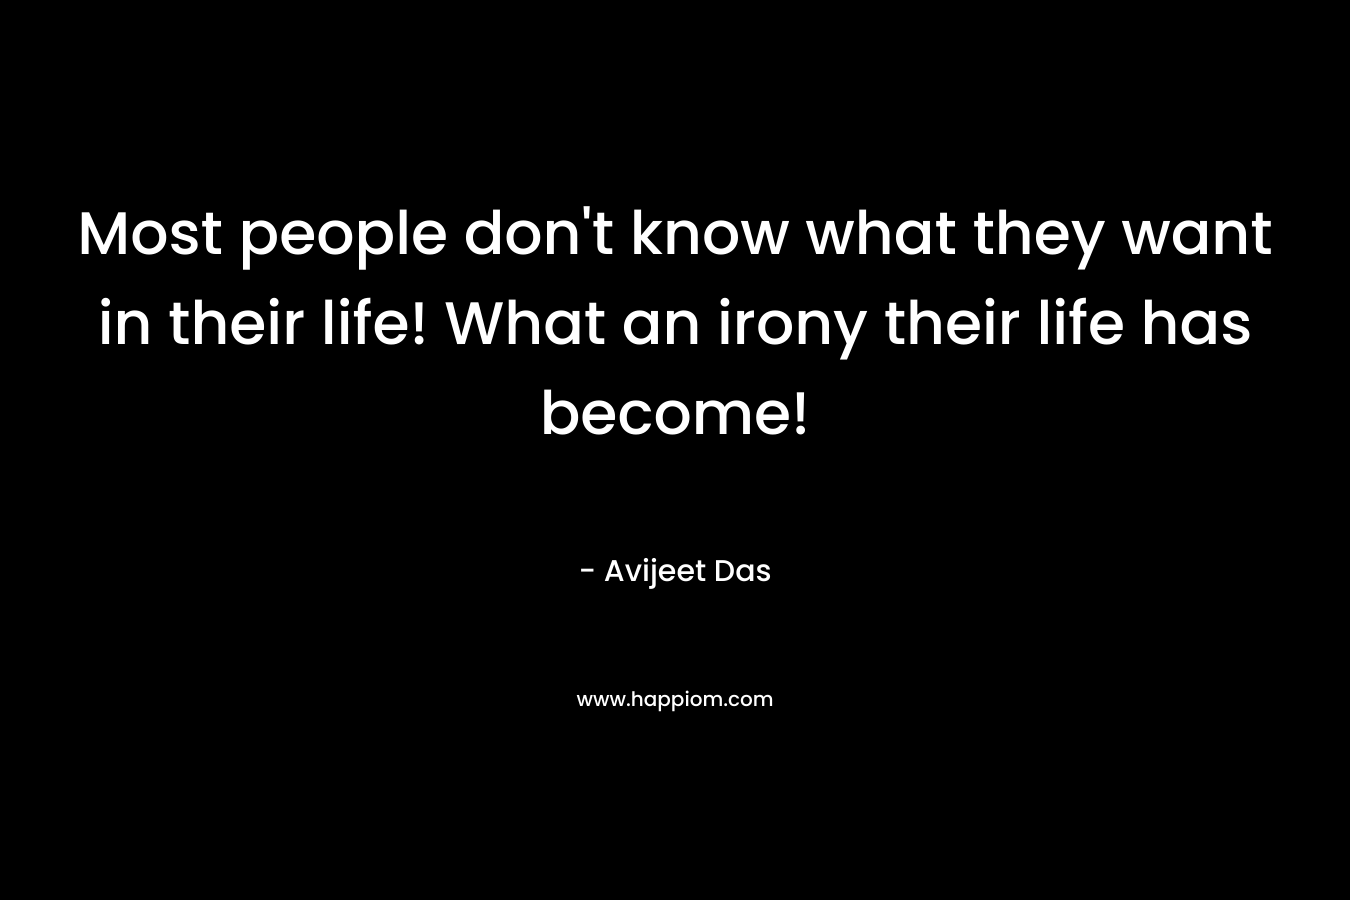 Most people don't know what they want in their life! What an irony their life has become!